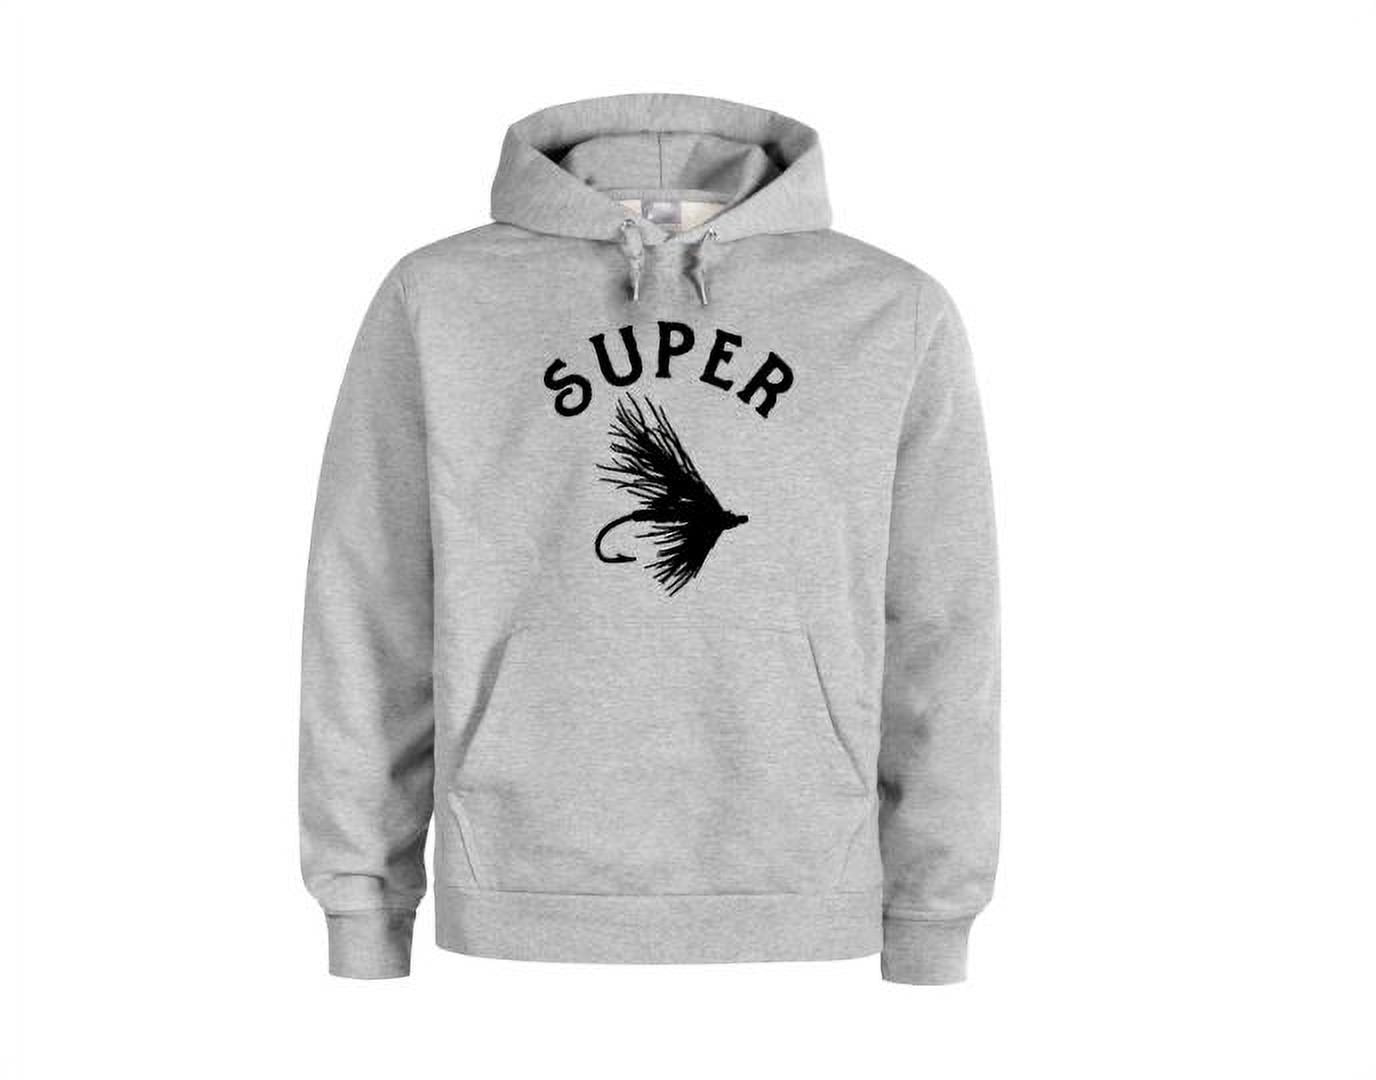 Fly Fishing Hoodie, Super Fly, Outdoors Wear, Fishing Apparel